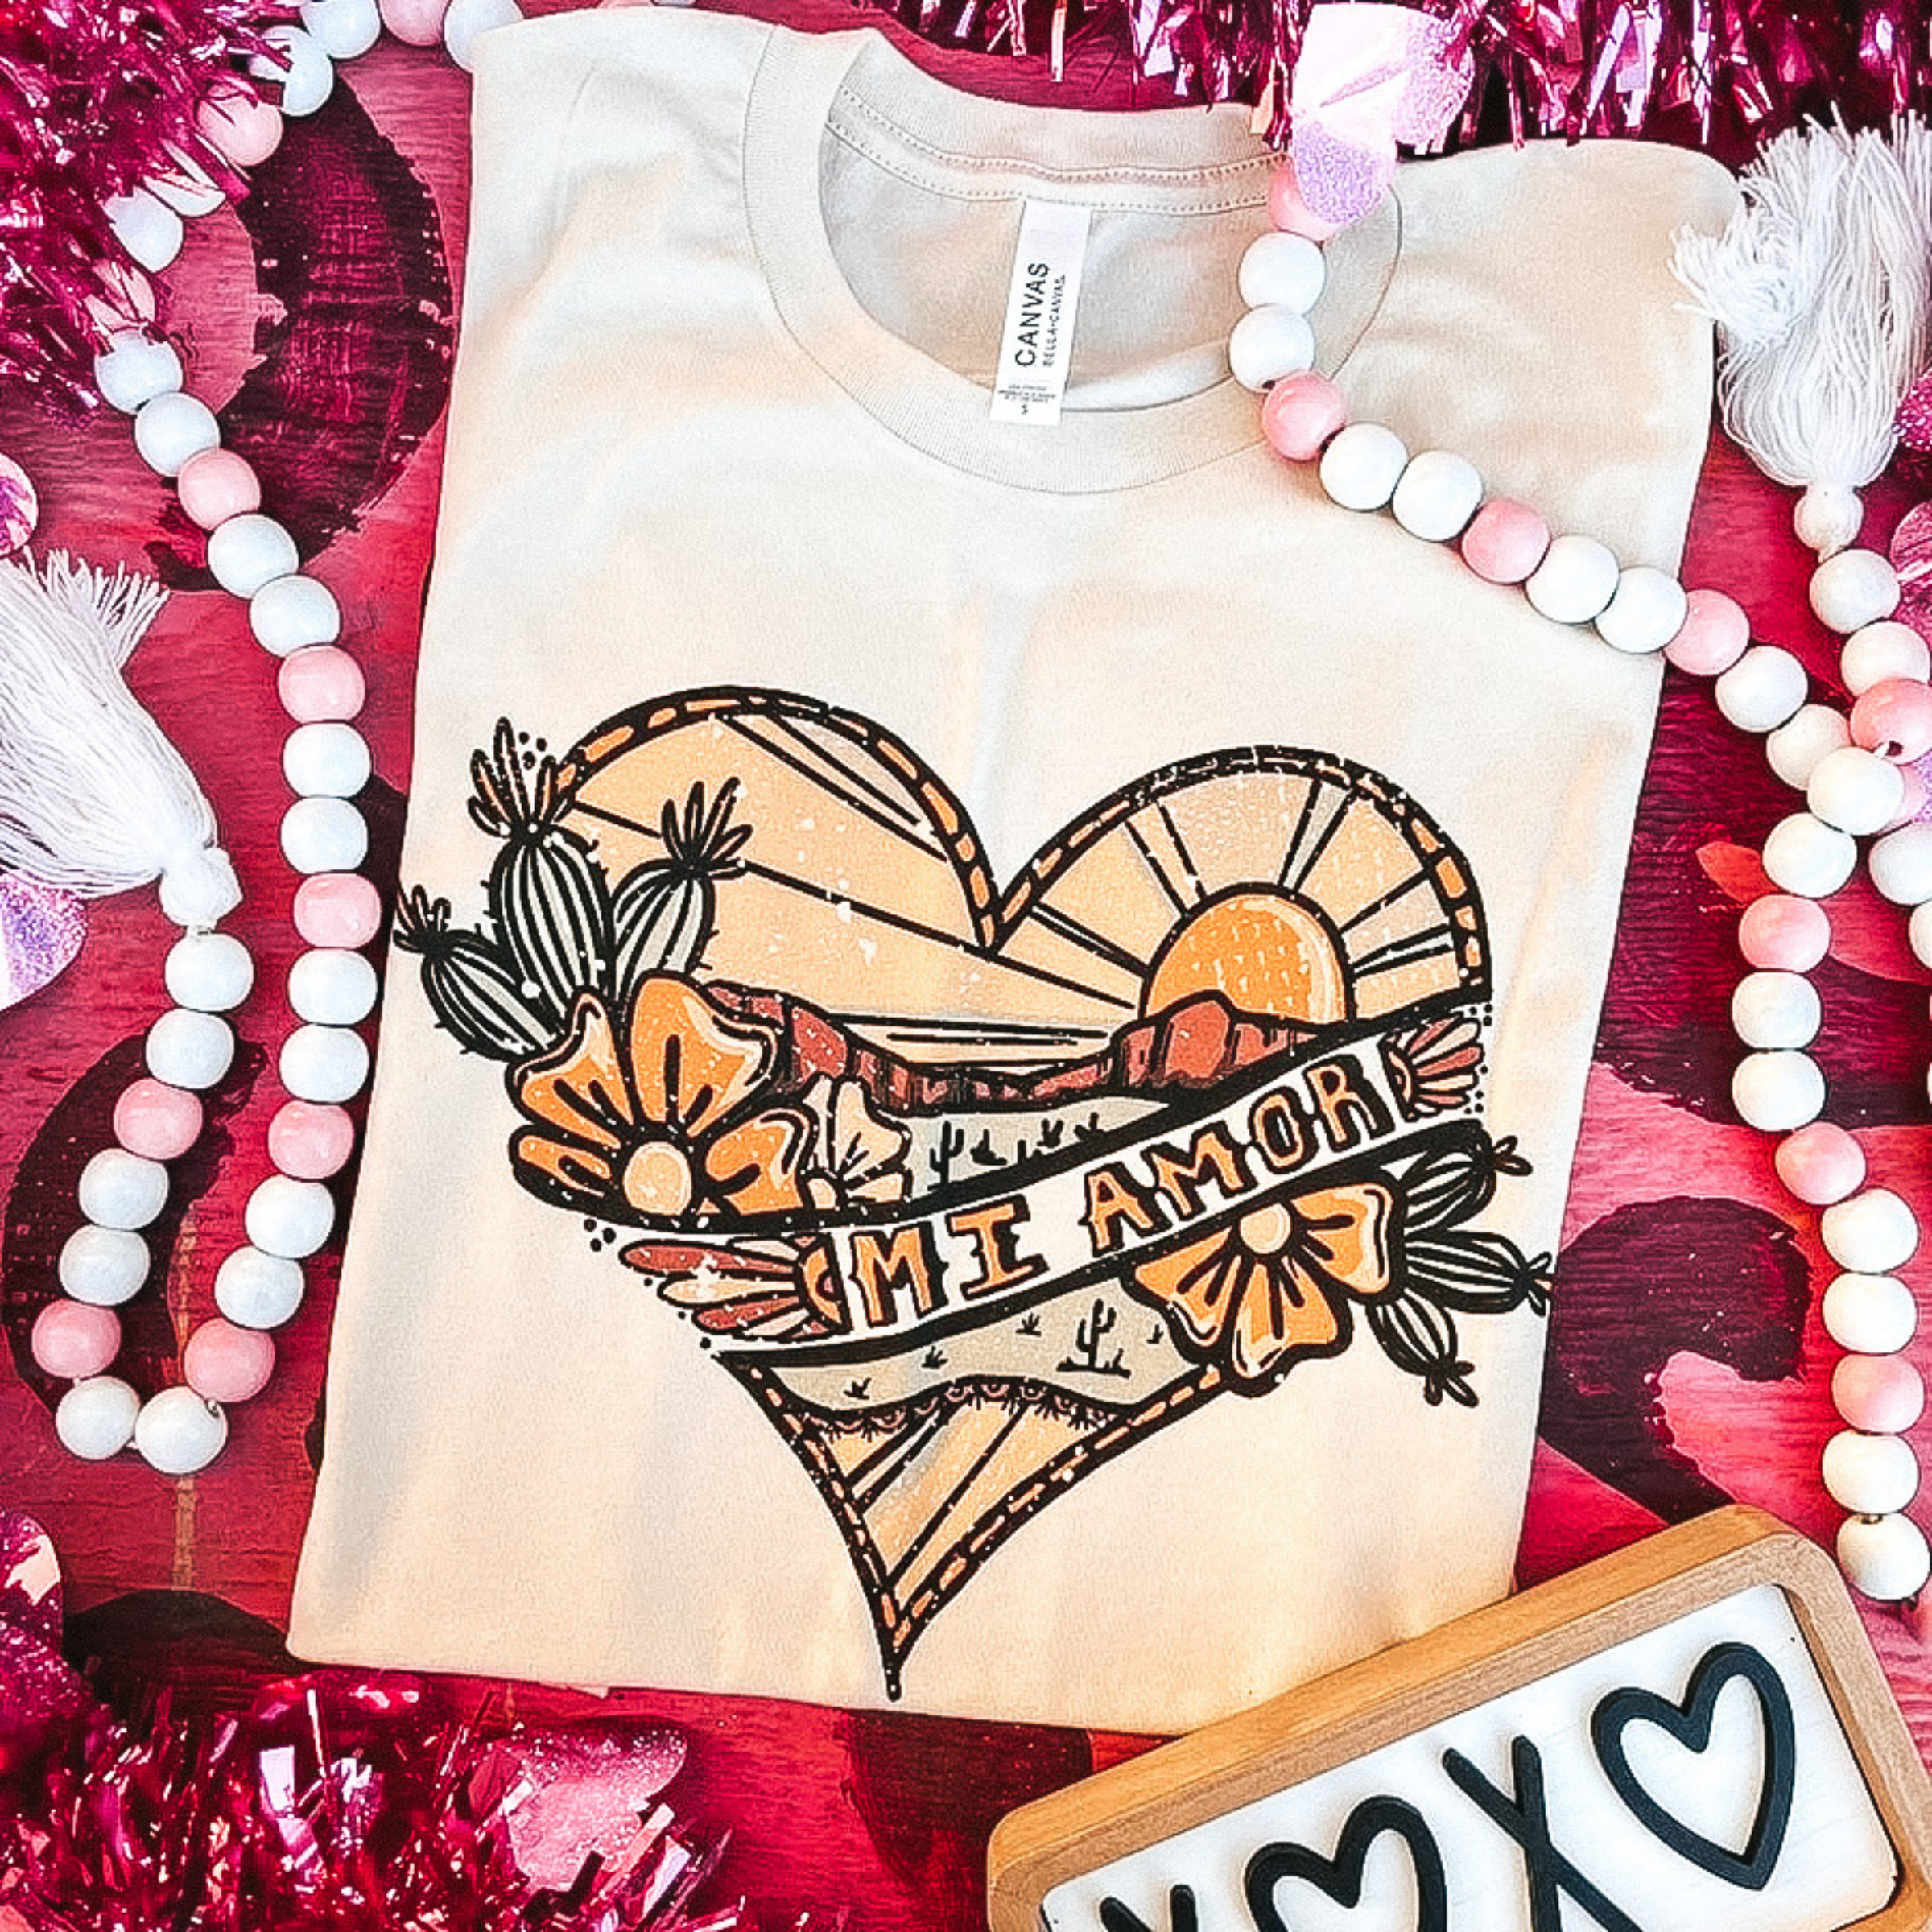 An ivory tee shirt with a desert heart graphic. Pictured on a pink background with beads, hearts, and tinsel.